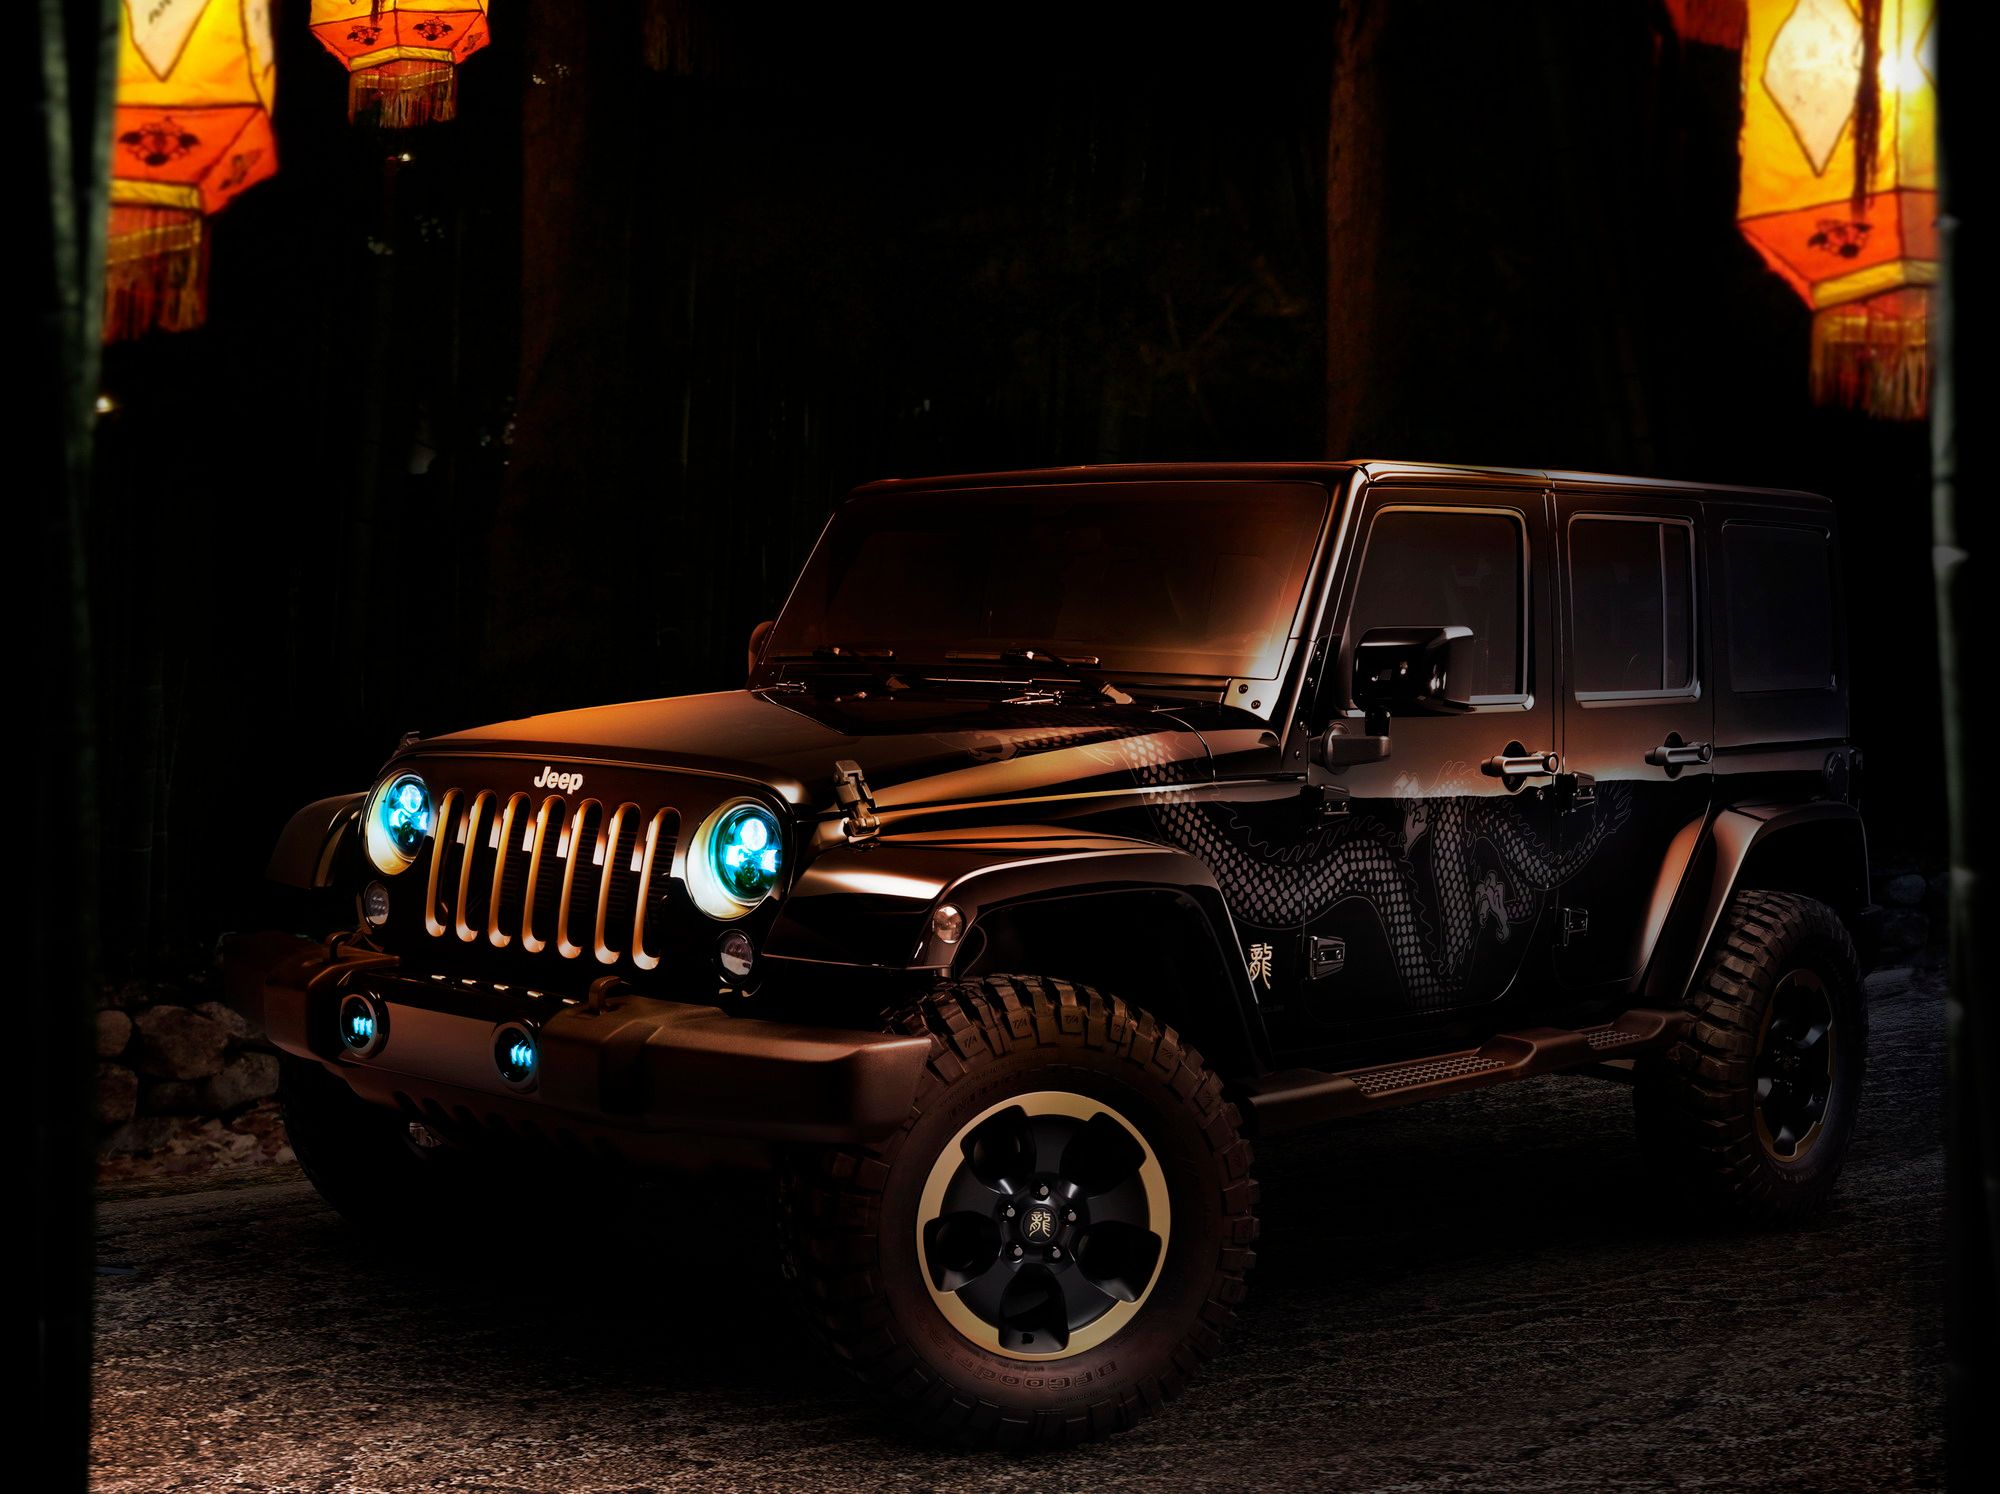 2012 Jeep Wrangler Year of the Dragon Concept